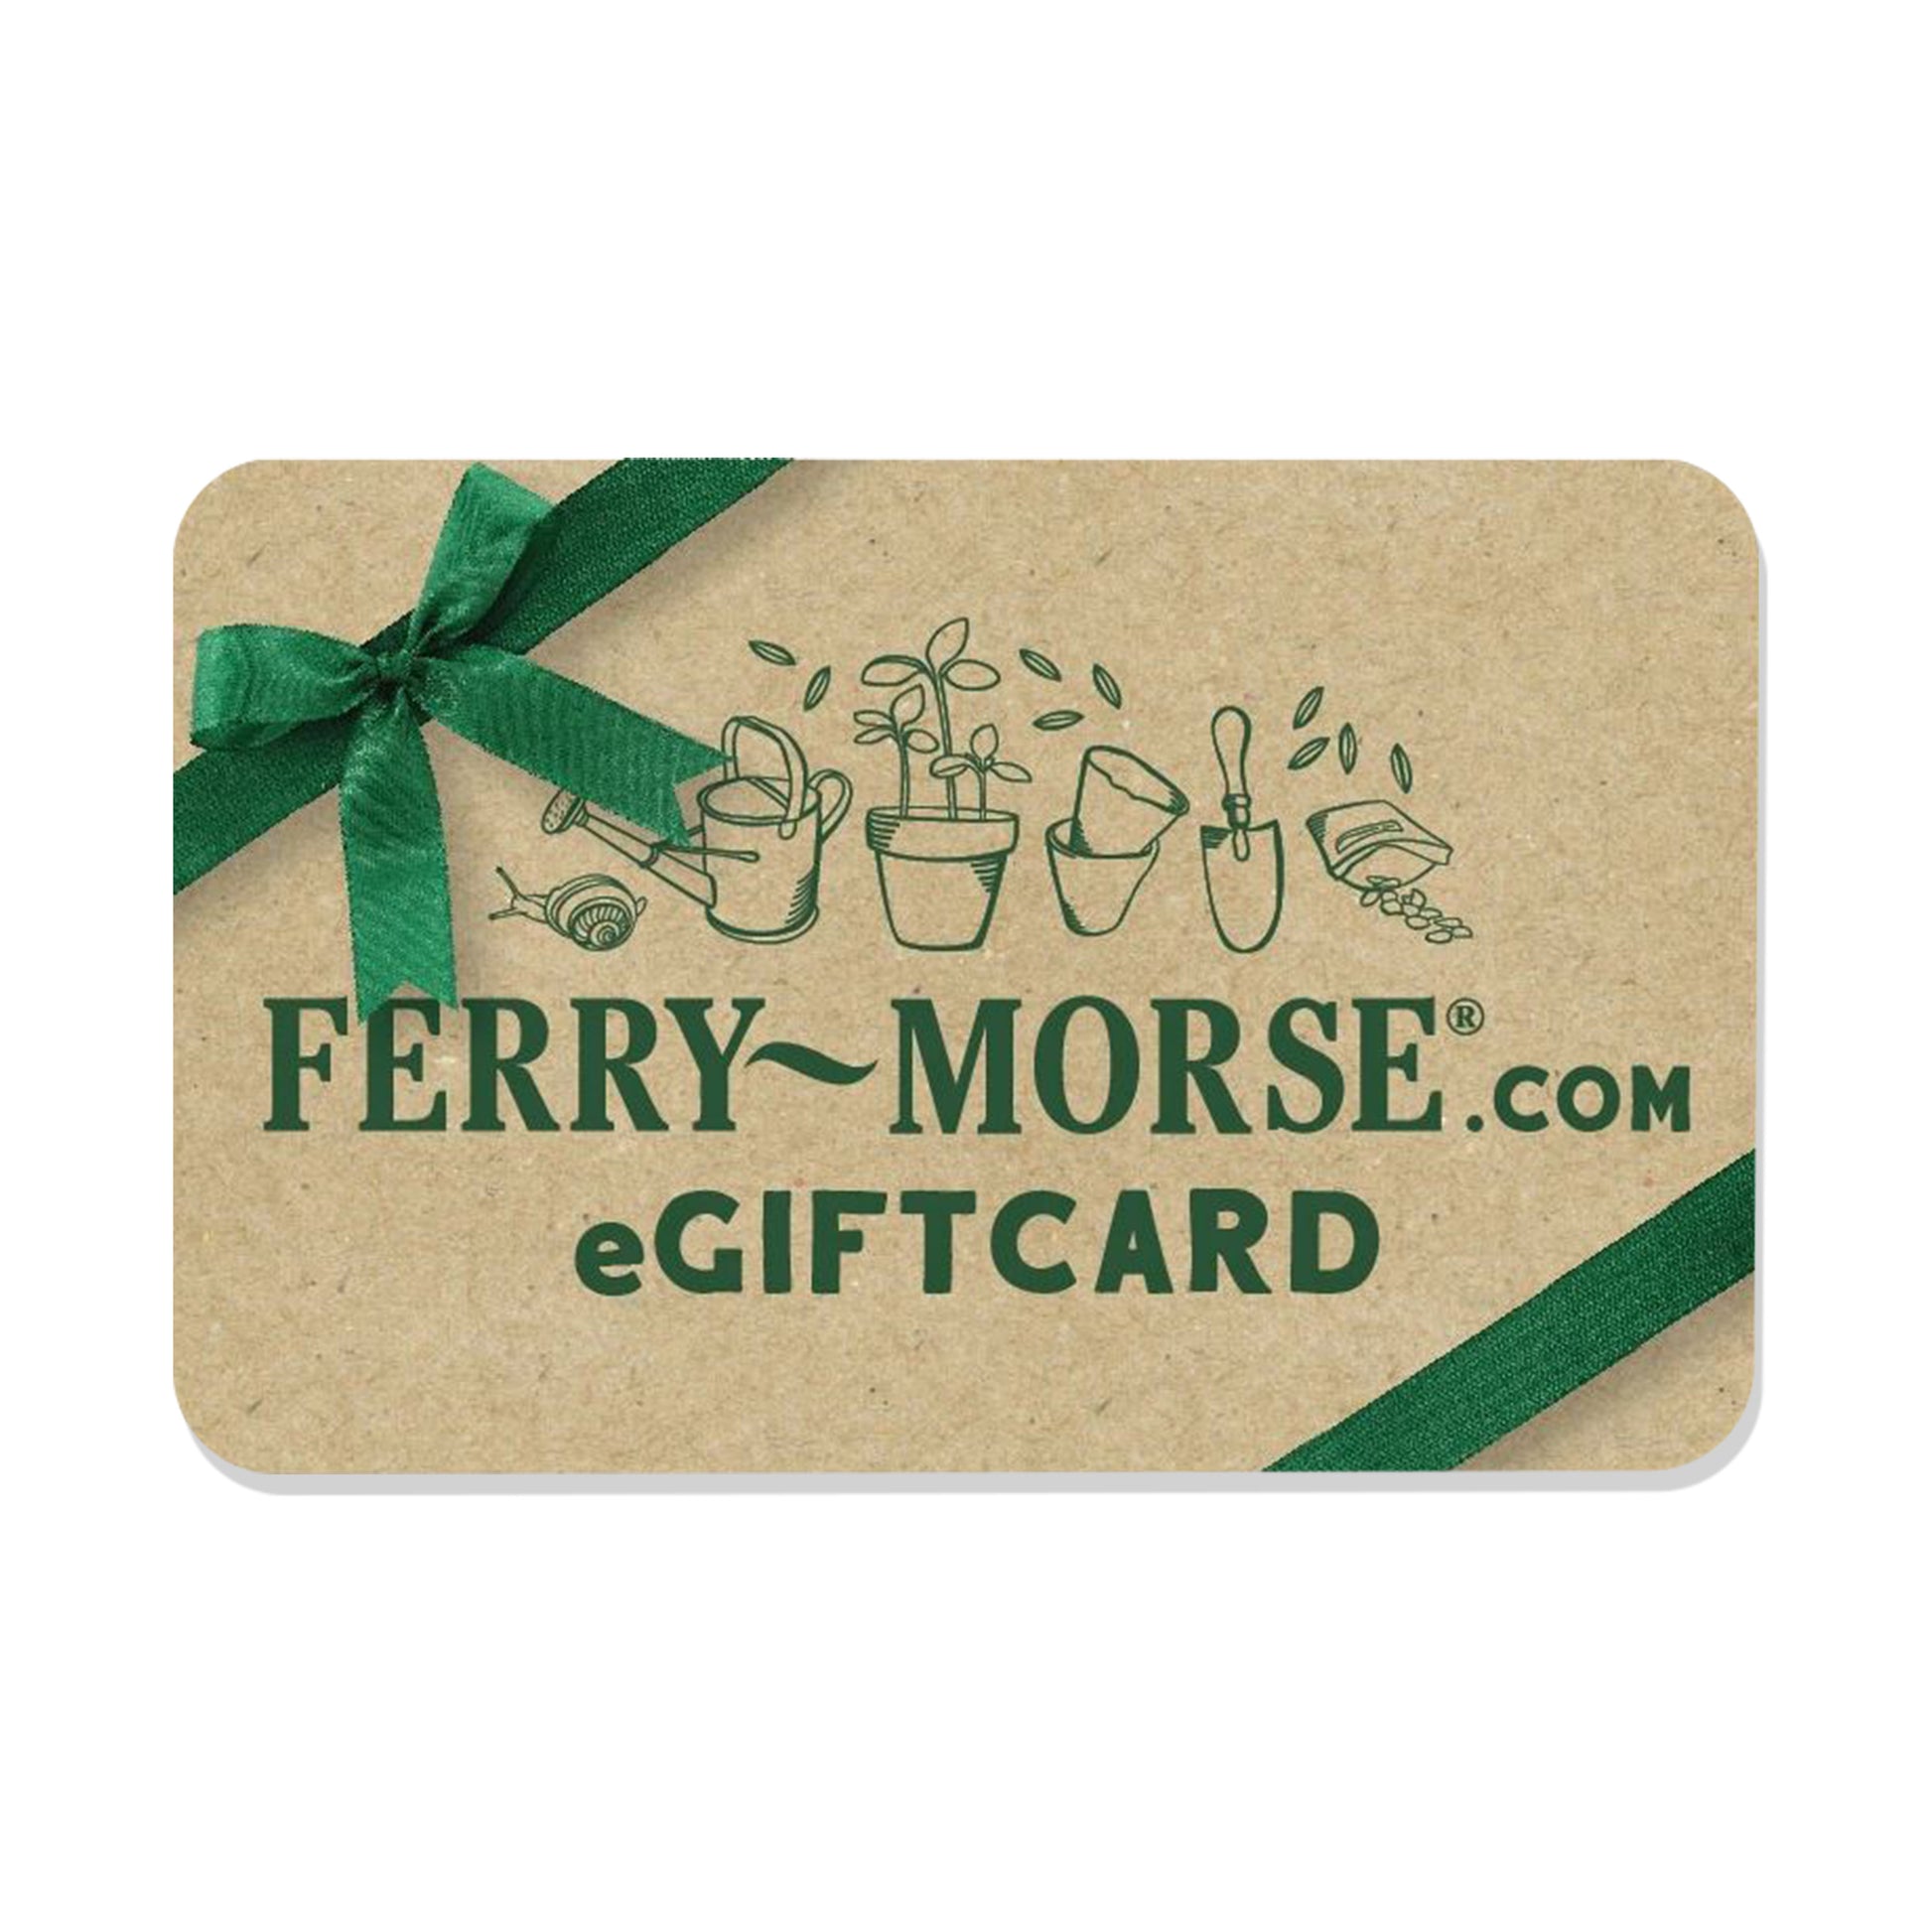 Ferry-Morse Gardening Electronic Gift Card for the gardeners on your shopping list!